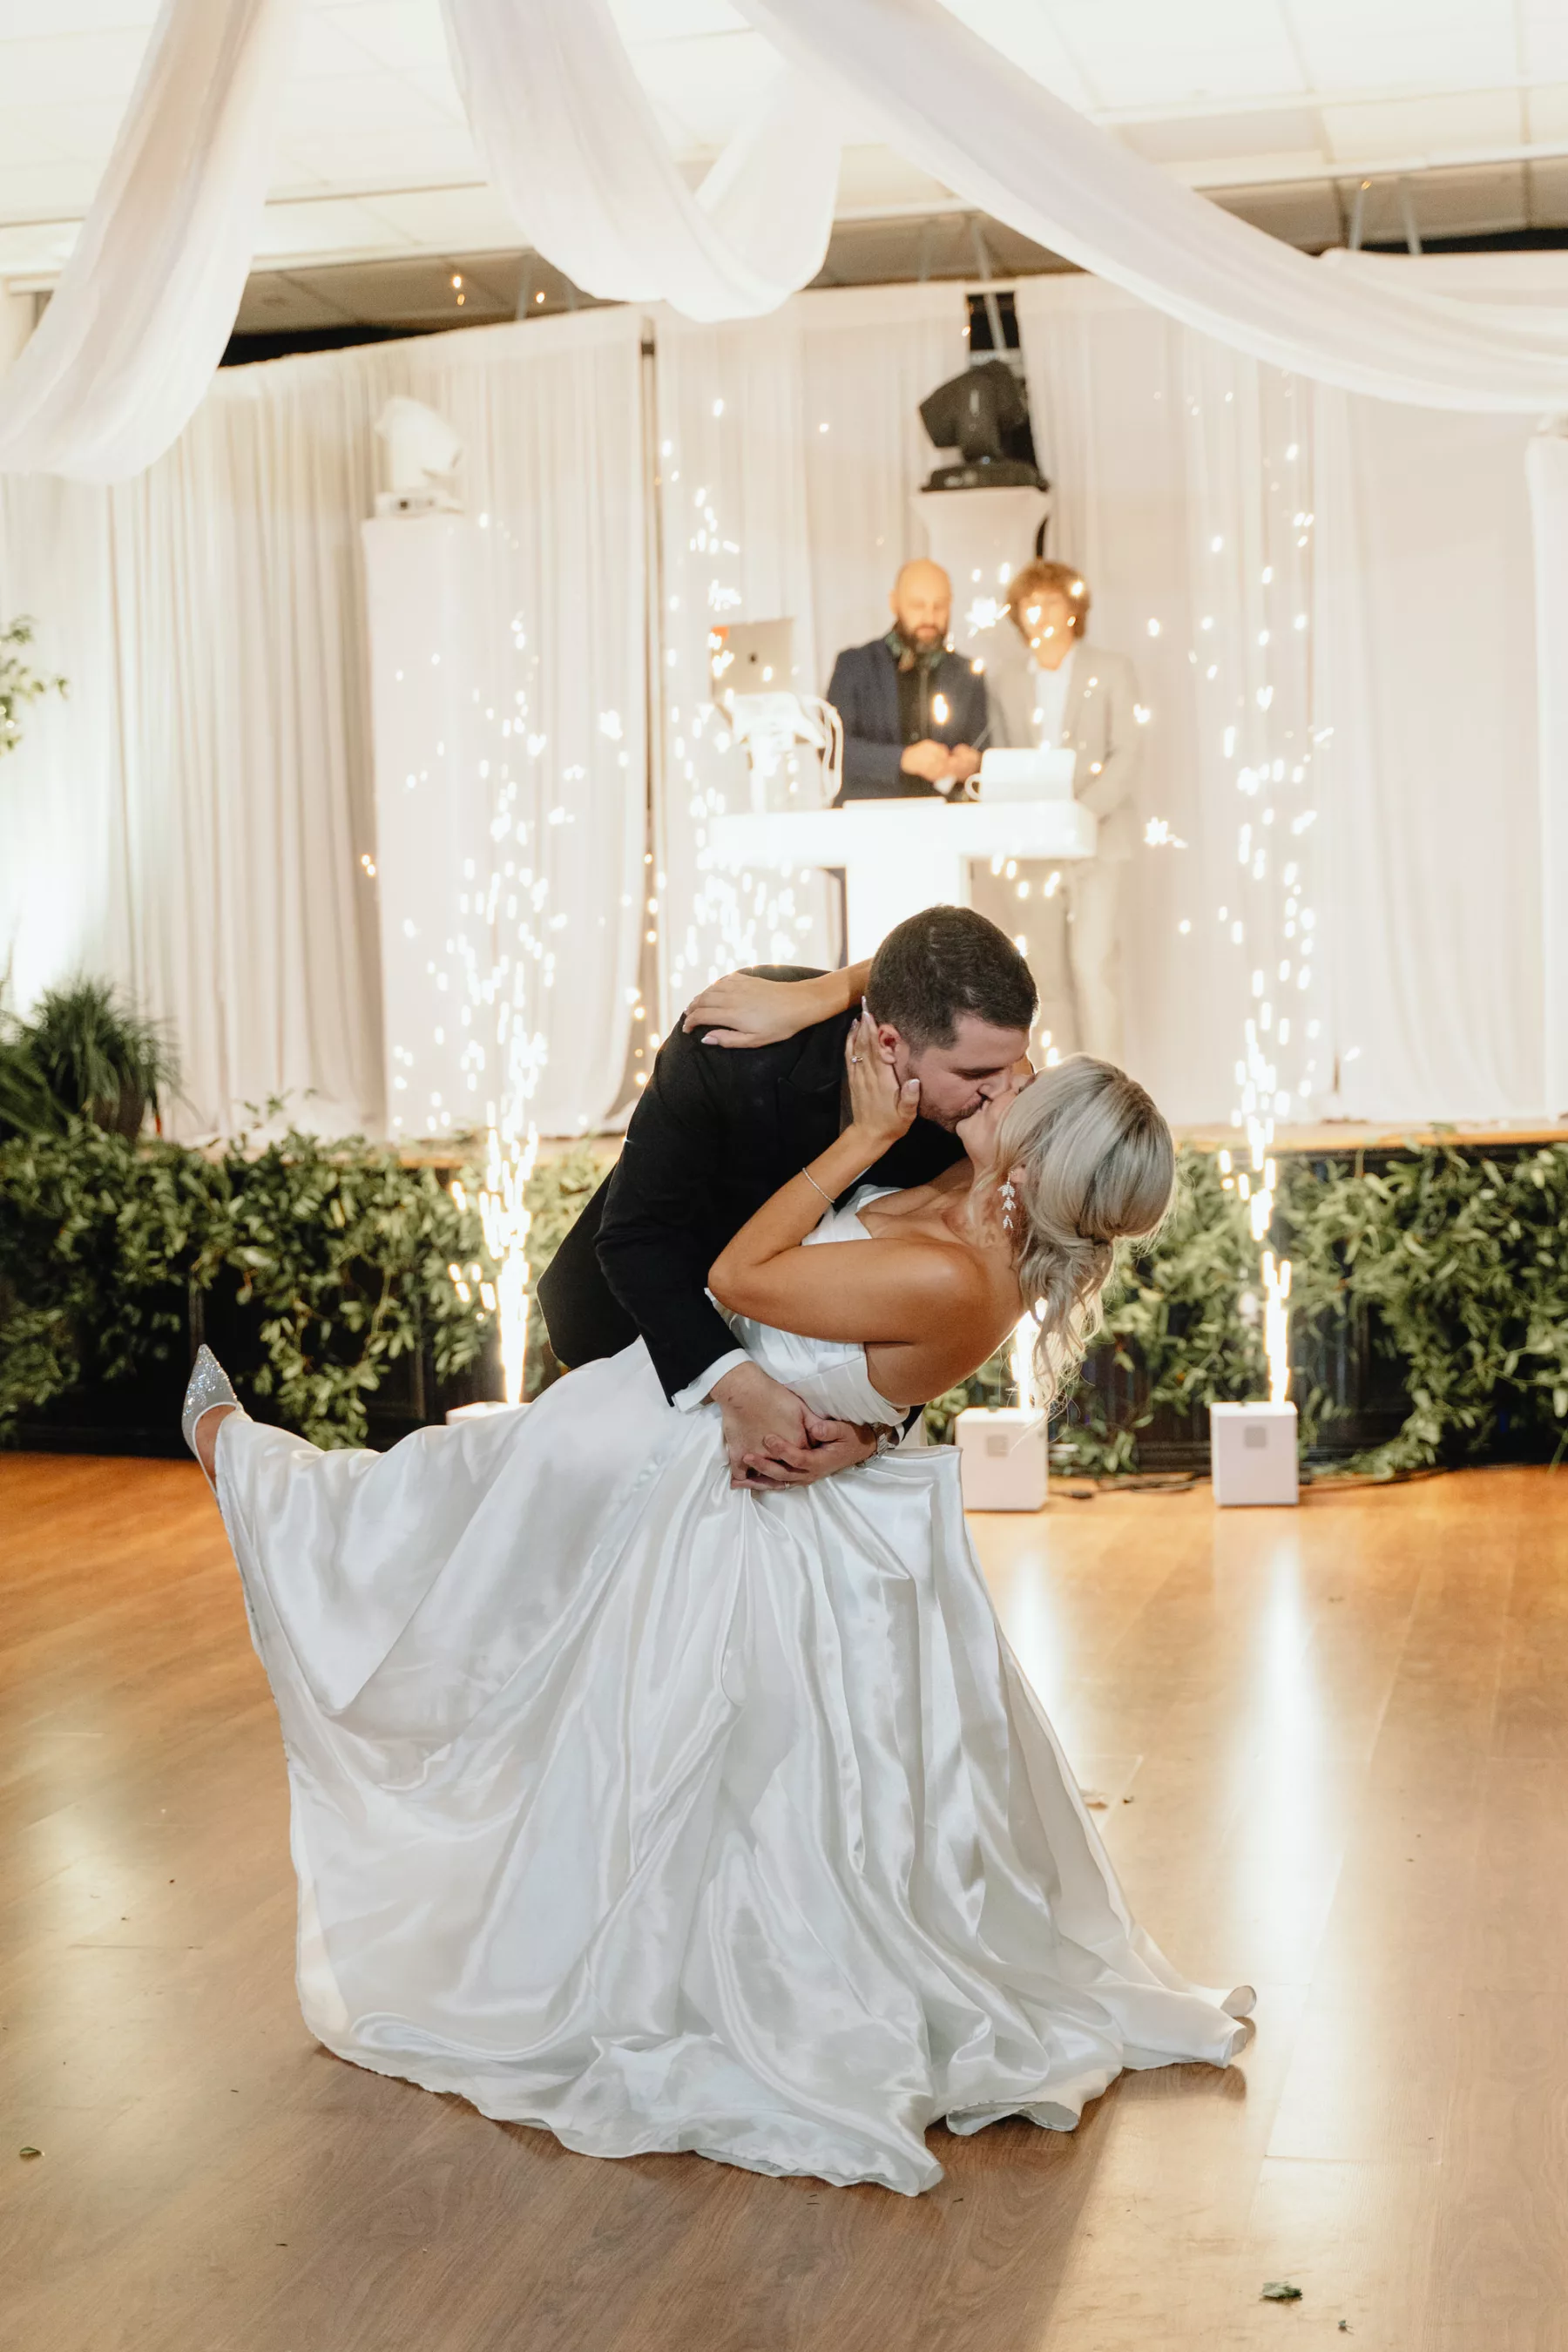 Bride and Groom Private Last Dance Wedding Portrait with Cold Spark Machine | Tampa Bay Content Creator Behind The Vows